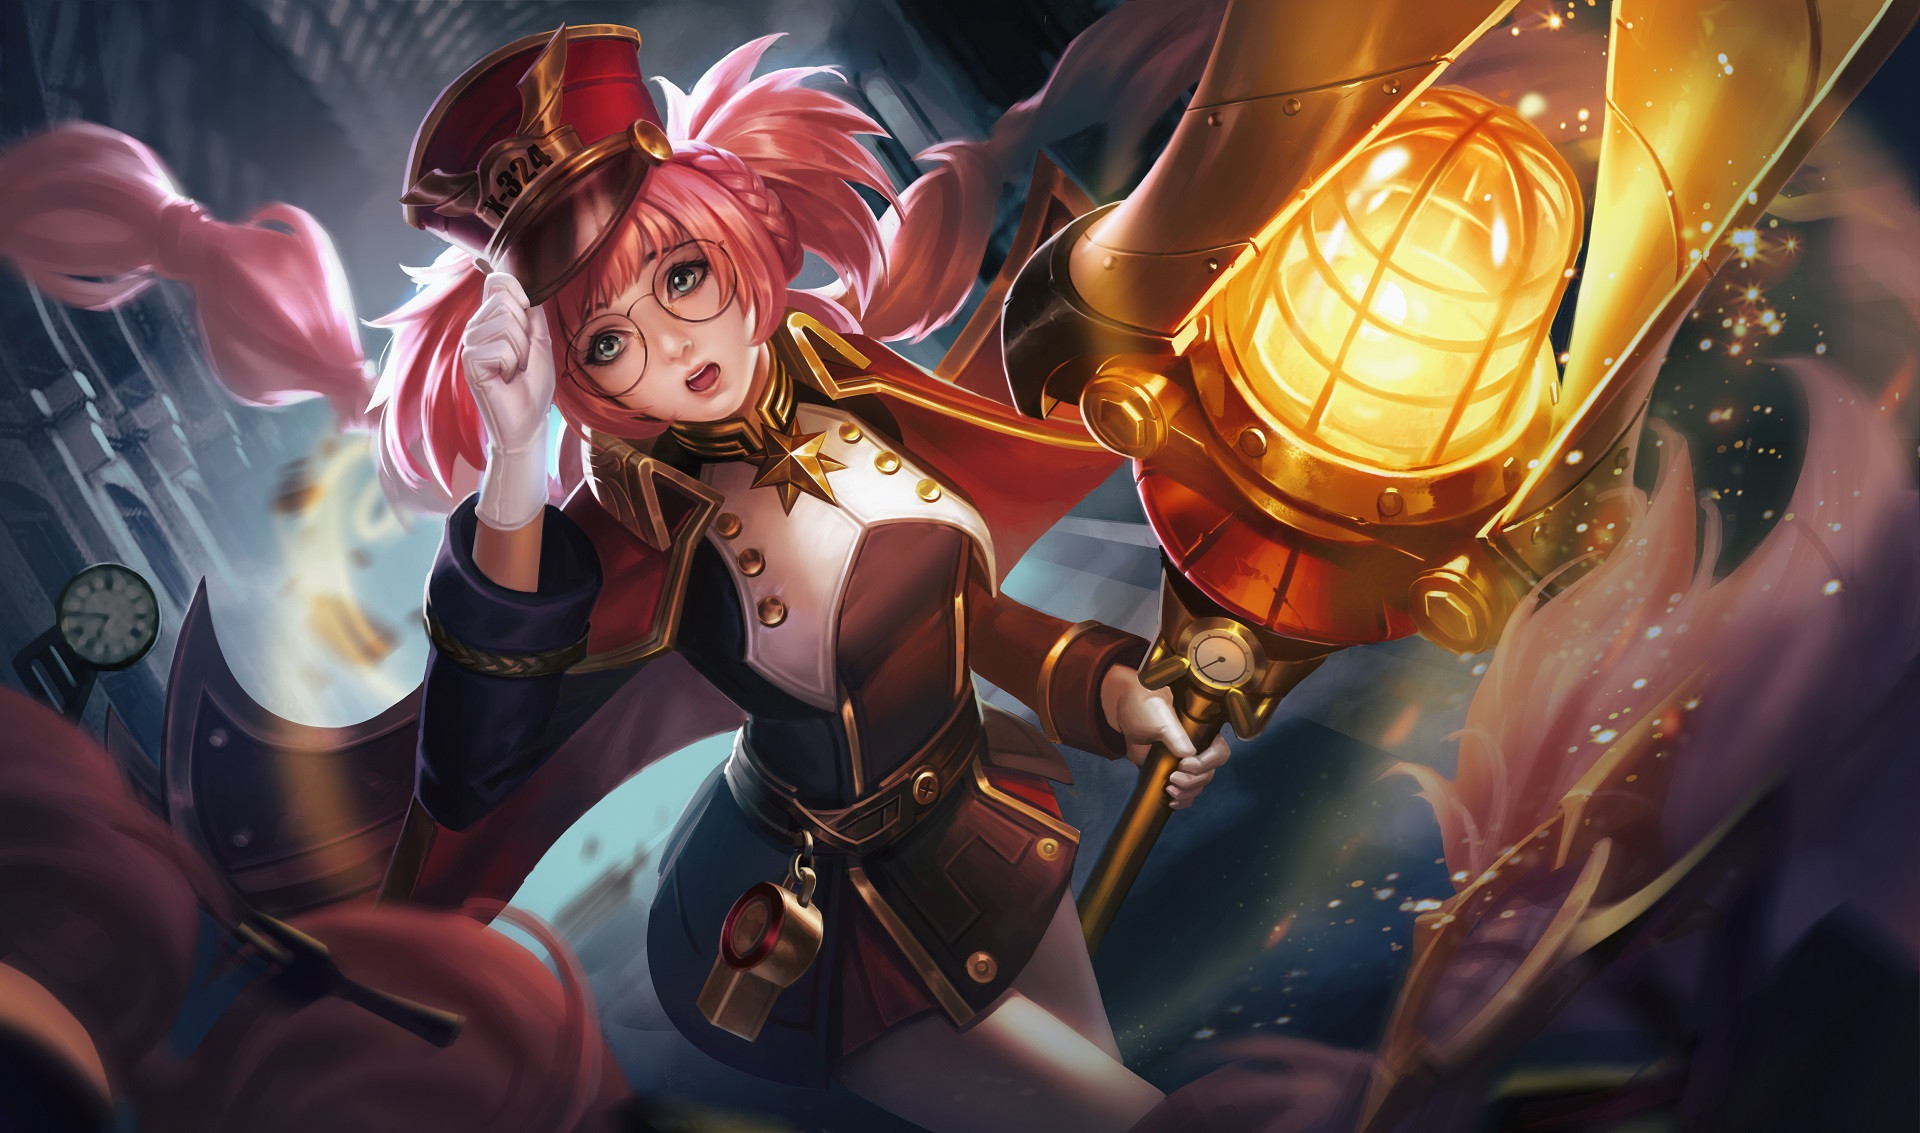 Anime 1920x1133 Arena of Valor video games video game art video game girls video game characters glasses hat gloves braids